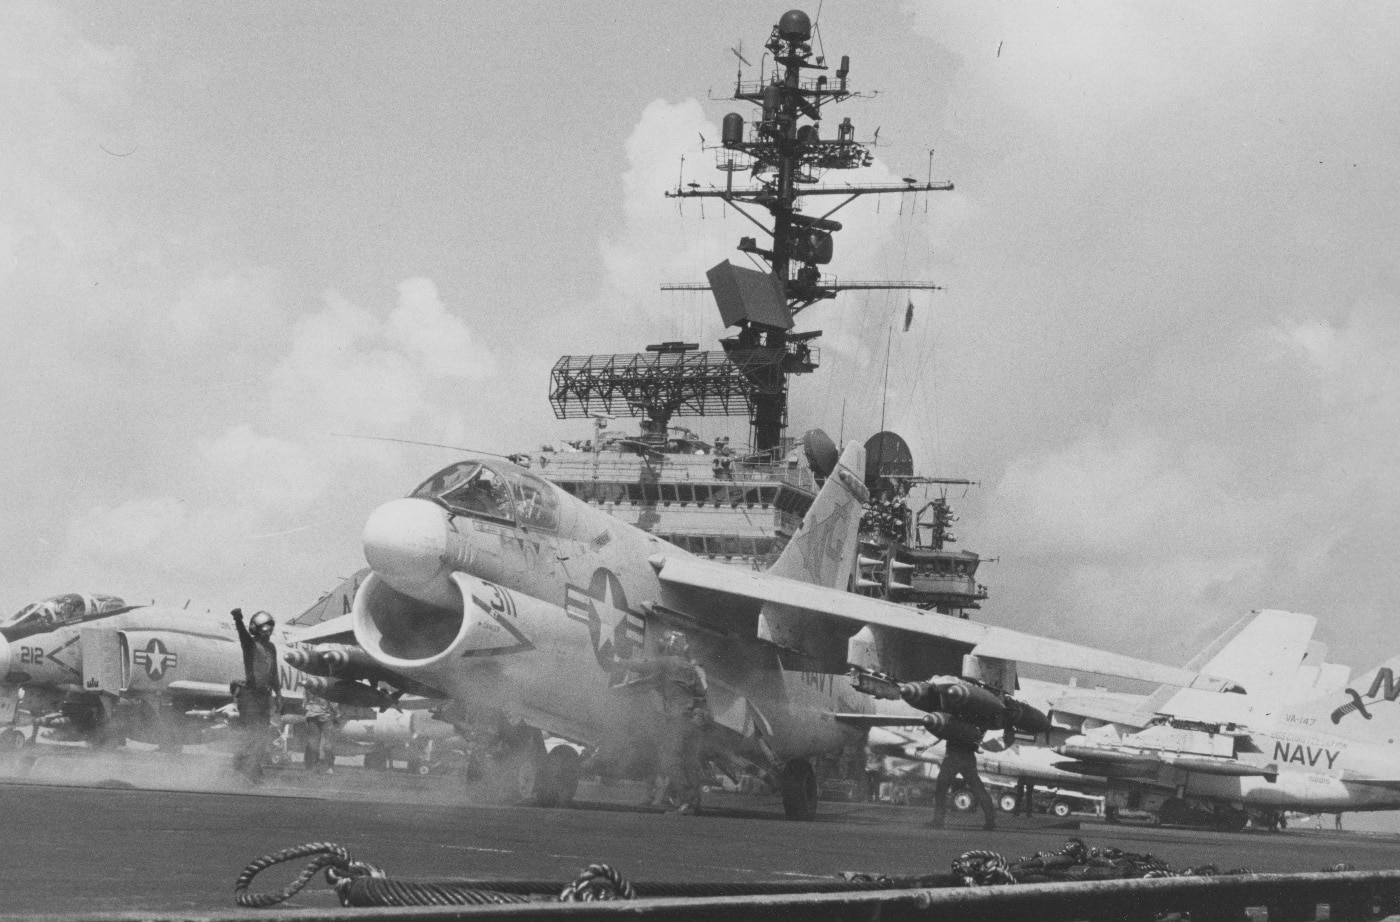 a-7e corsair launches from deck of uss constelation